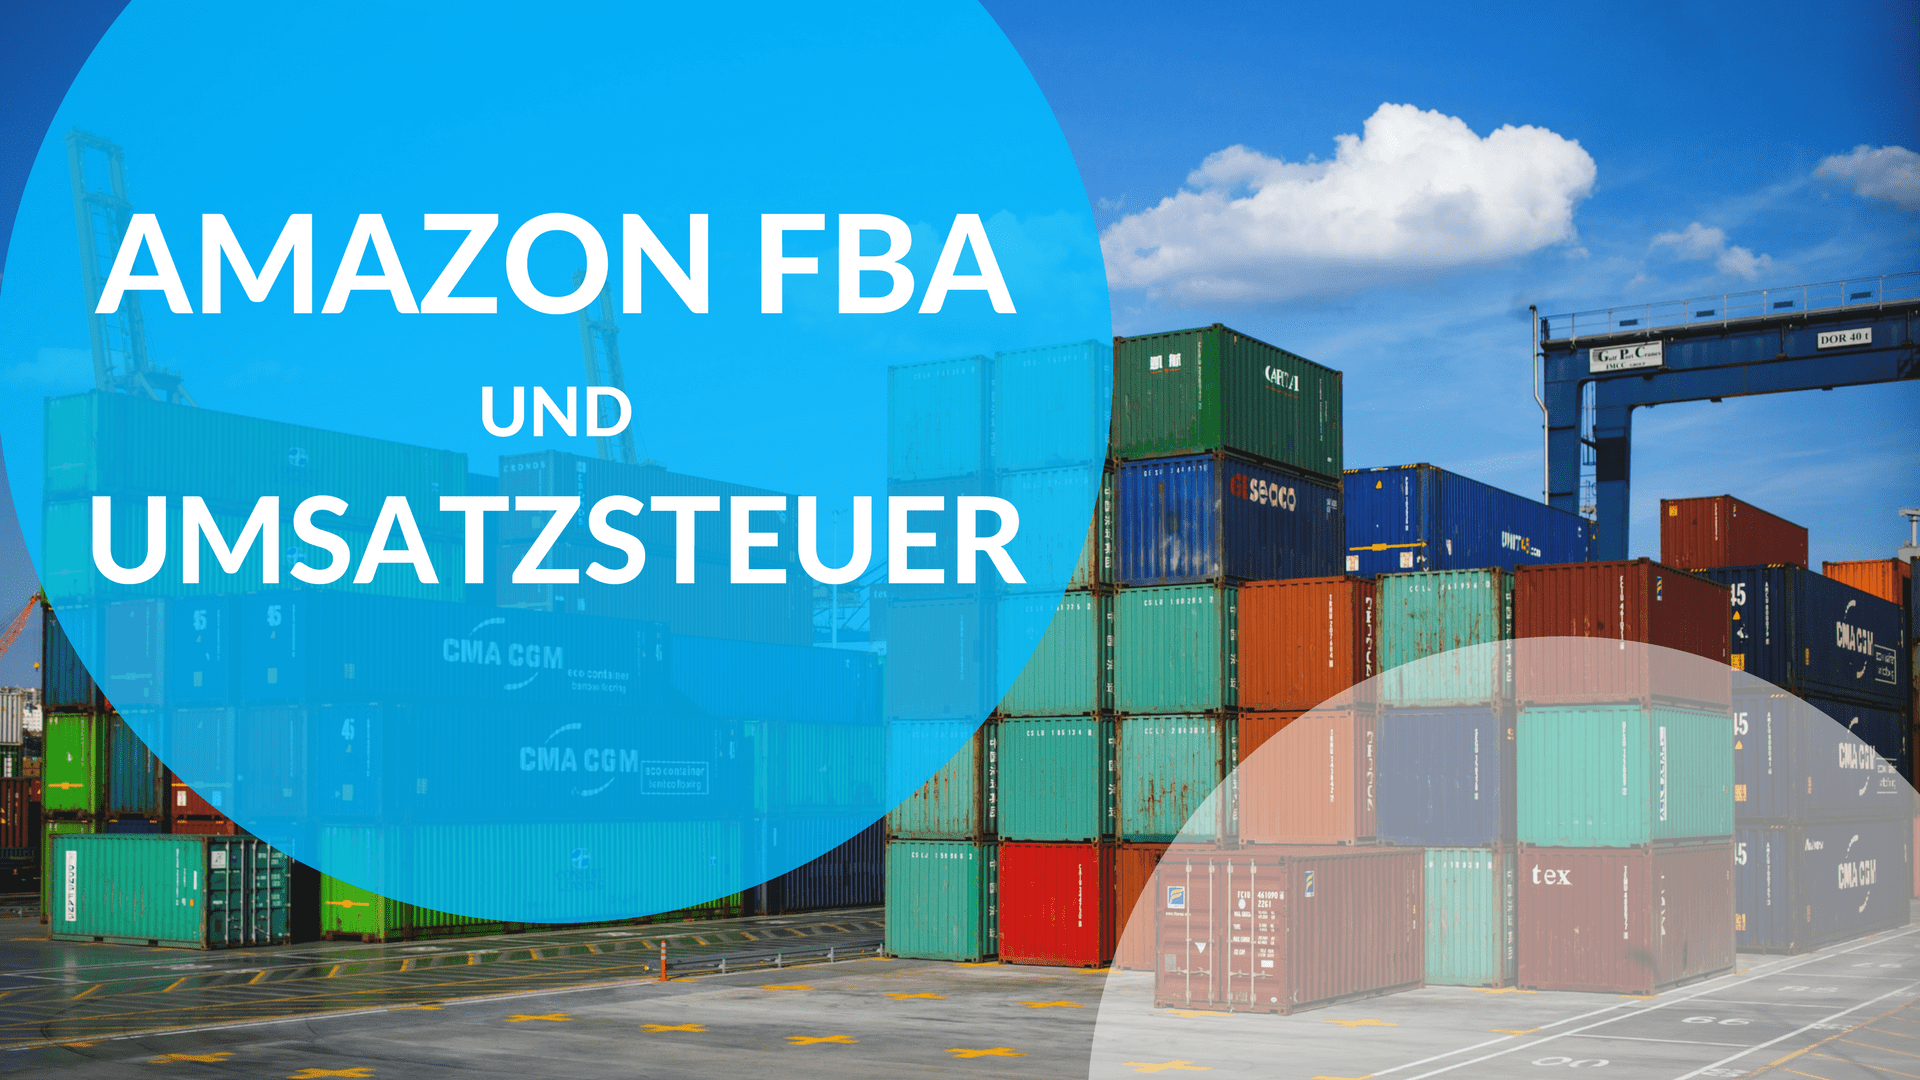 Amazon FBA and Value Added Tax